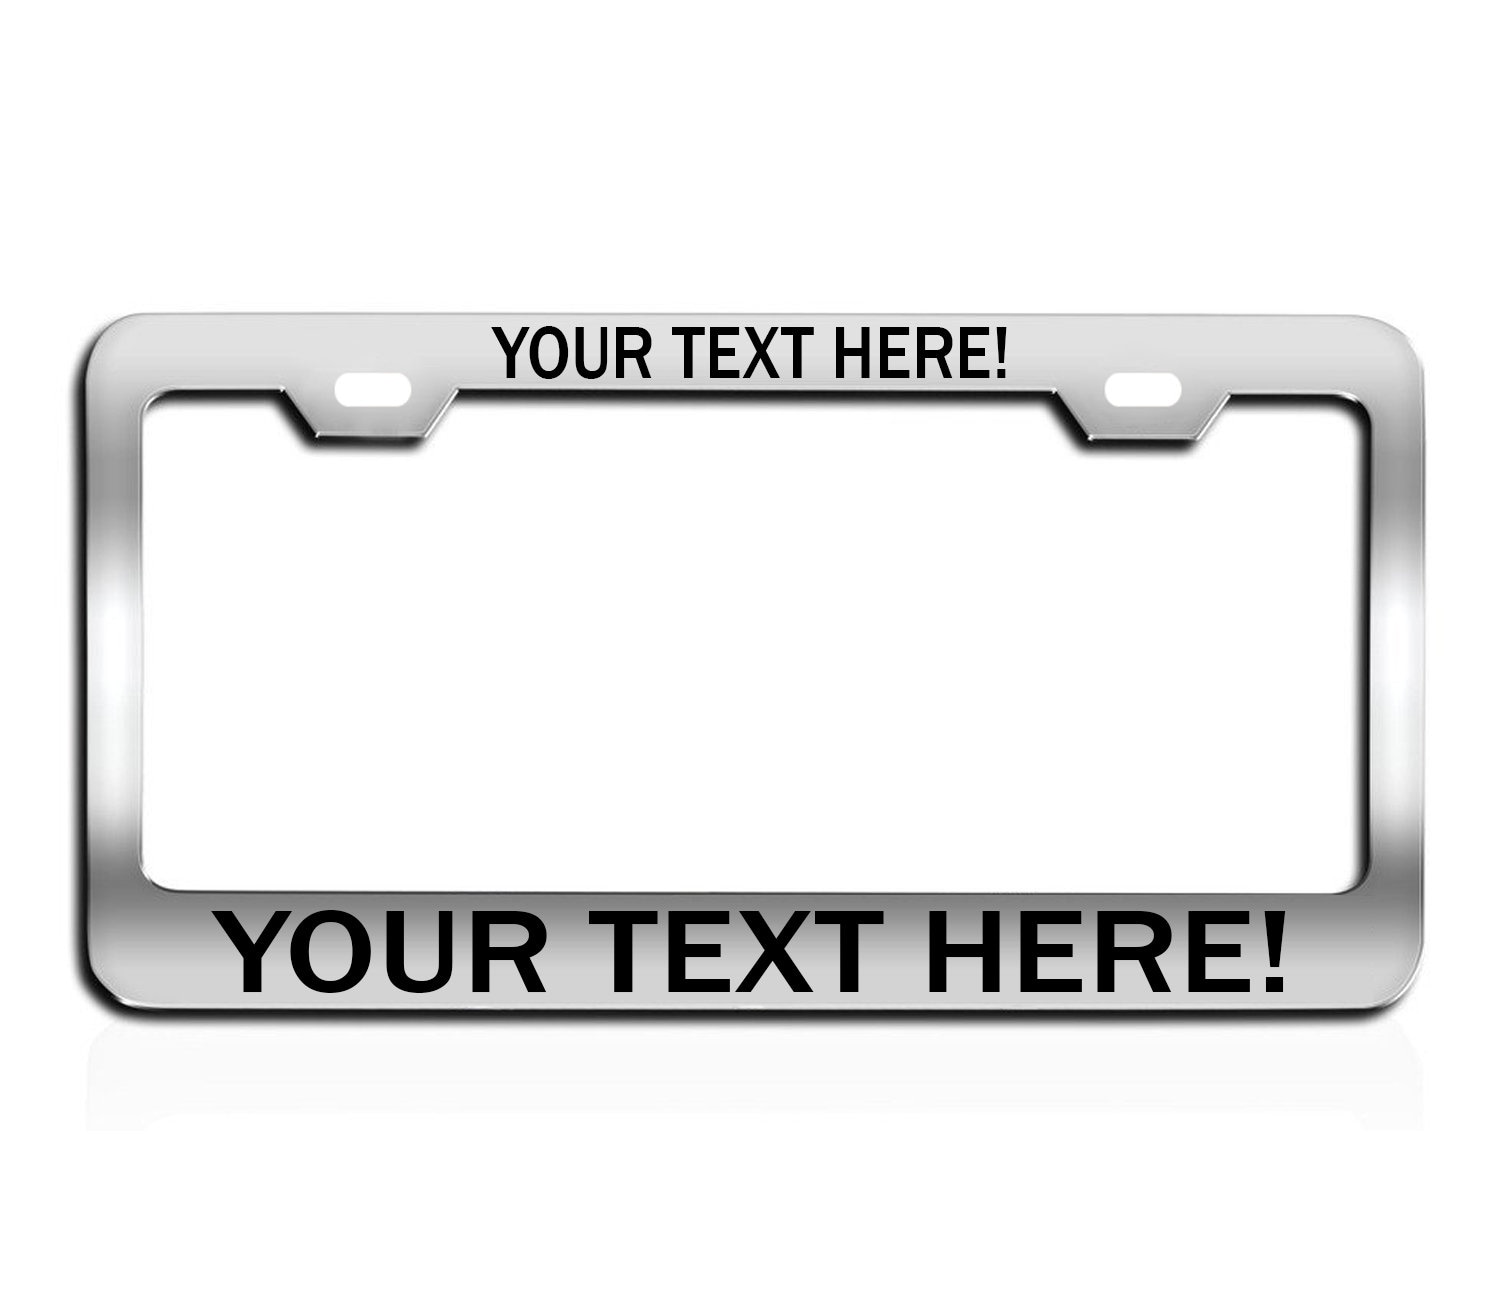 Humor Funny Auto Car License Plate Cover Aluminum Metal License Tag Frame Personalized Frames Black License Plate Frame for Women/Men